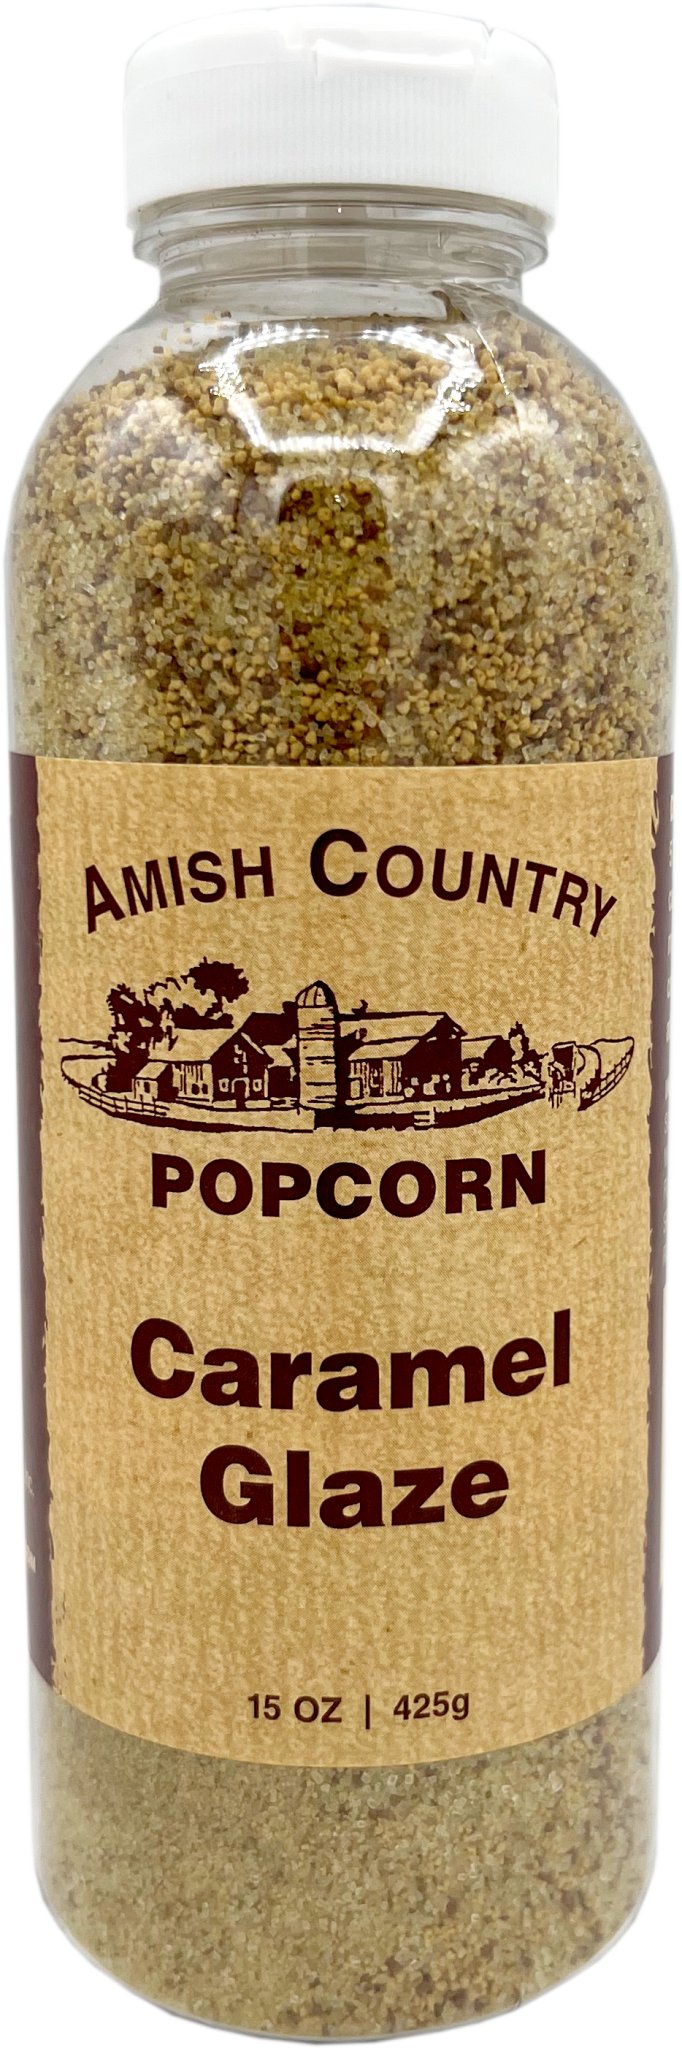 Amish Country Popcorn - 15oz Bottle of Caramel Glaze - Pacific Flyway Supplies